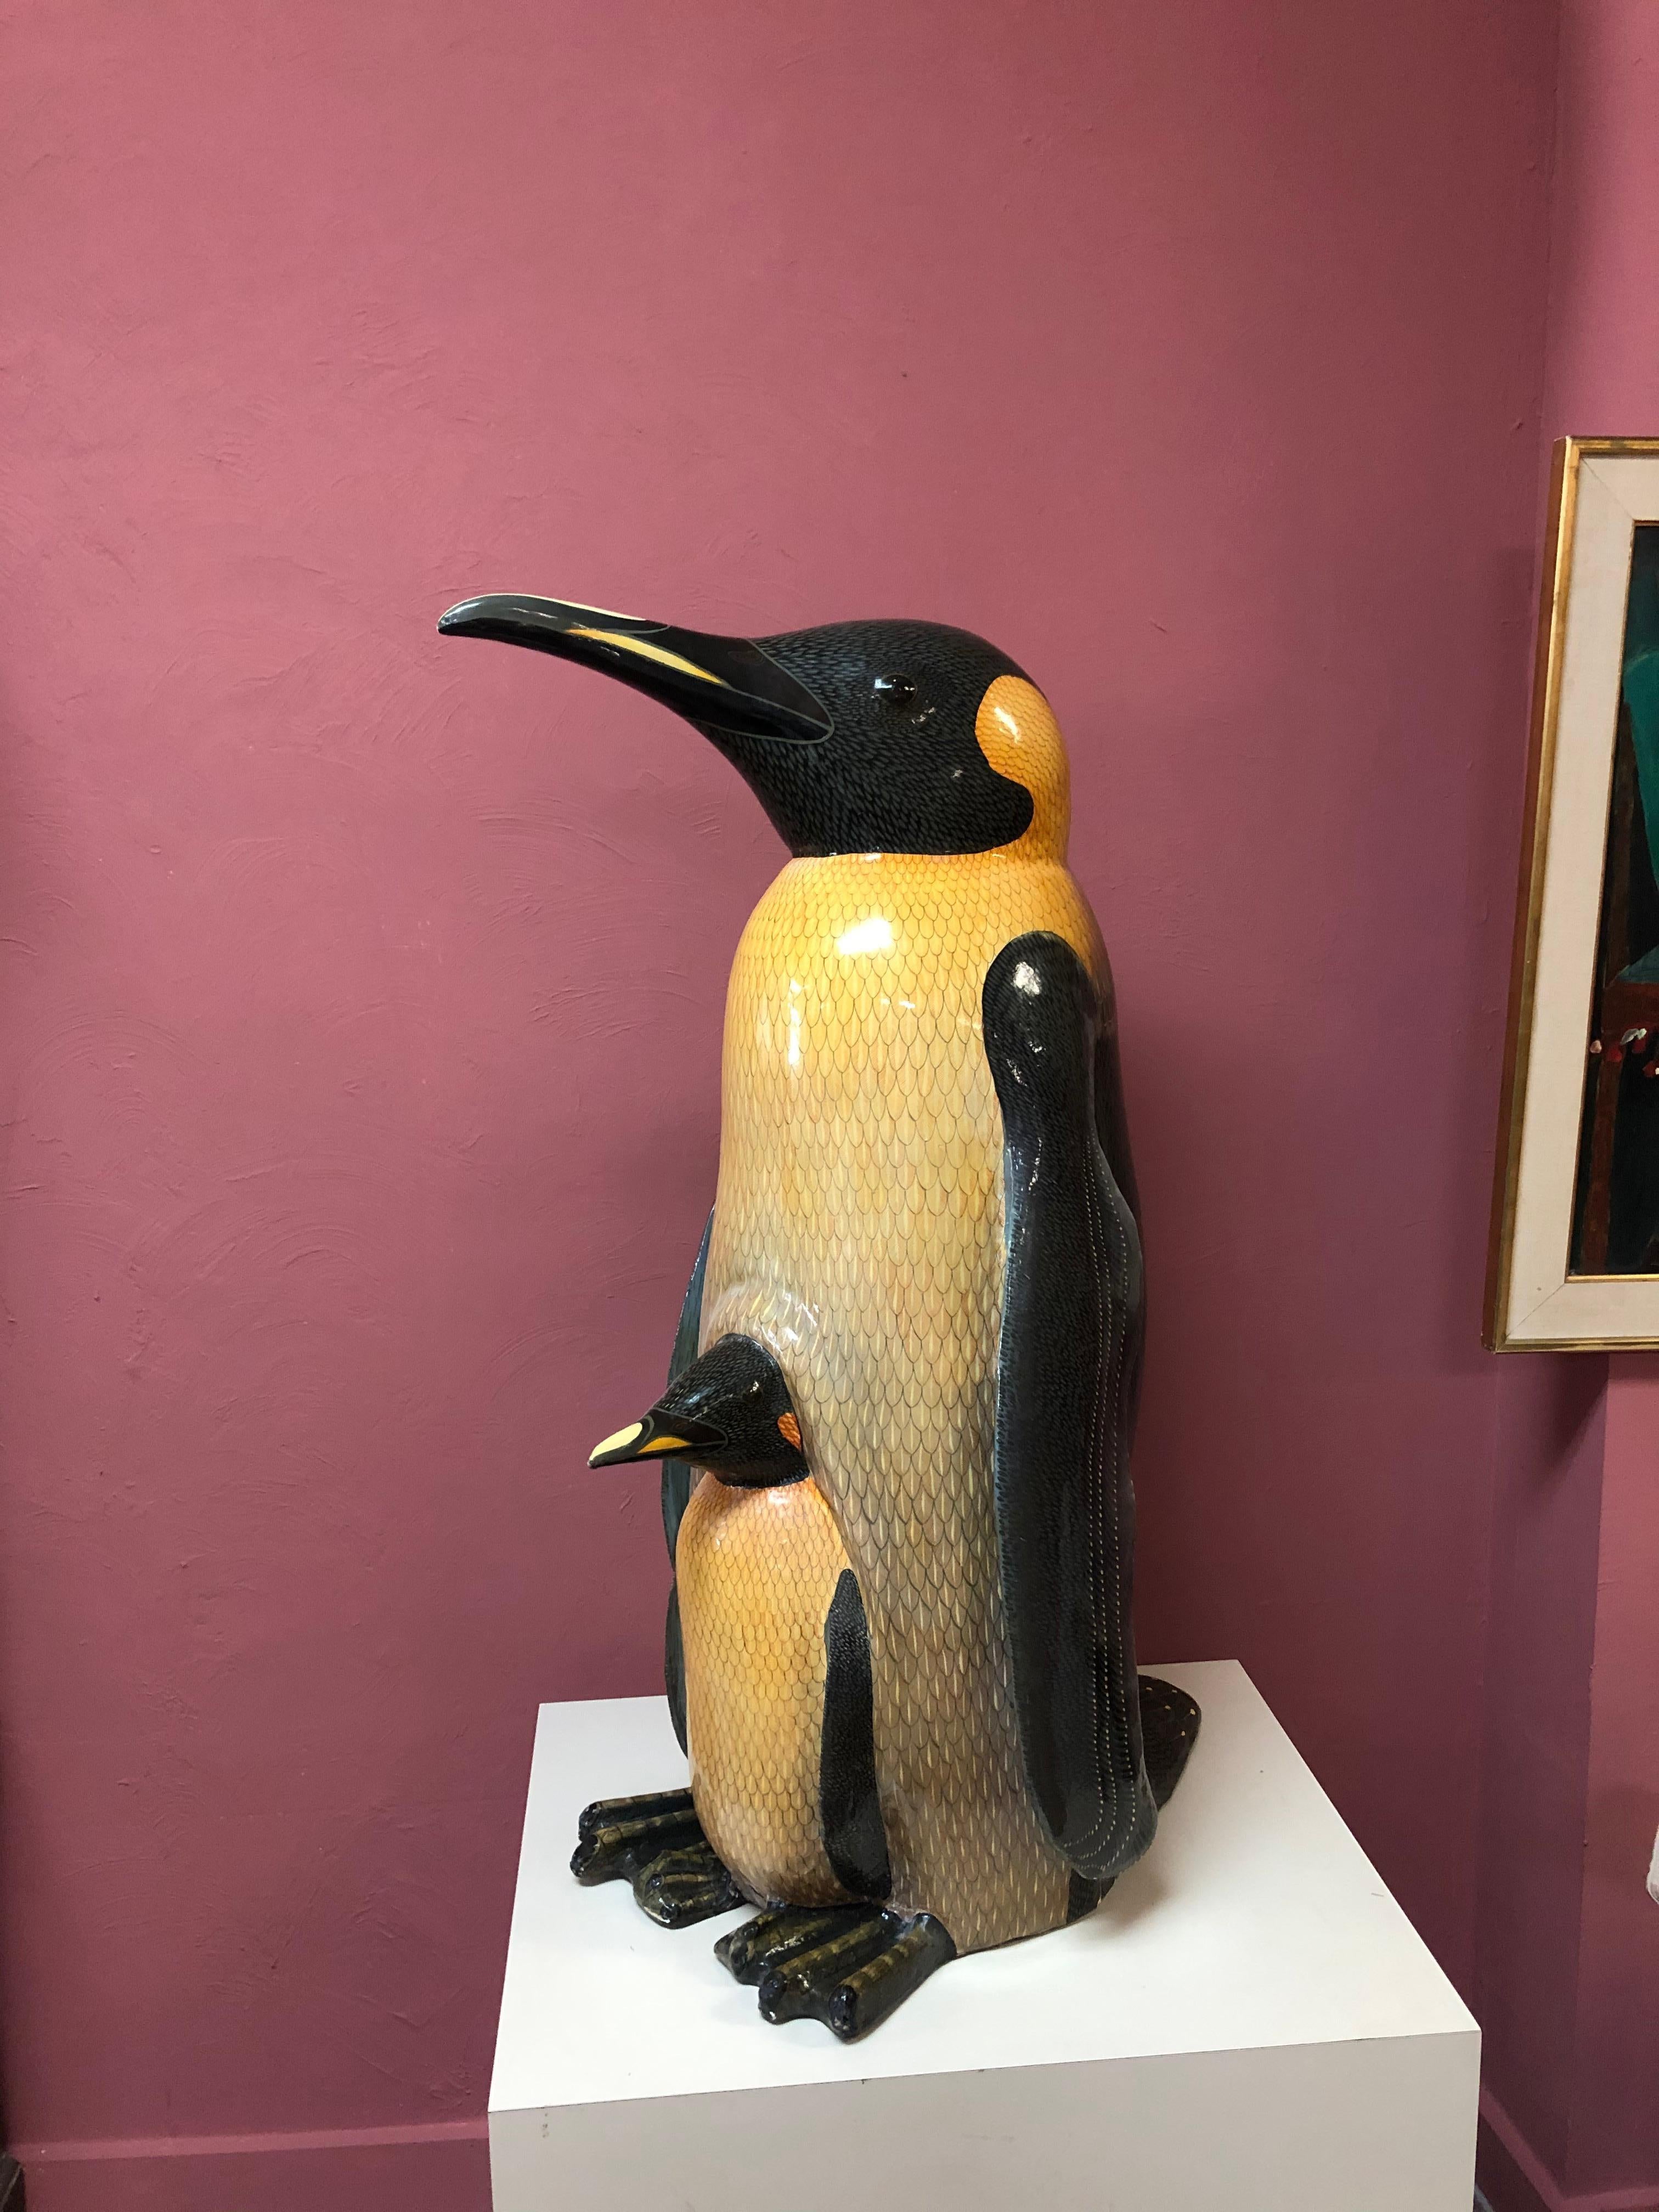 Fabulous Sergio Bustamante sculpture of mother Penguin with baby. This rarely available piece was made from paper mache and other materials. Probably created in the 1970s or 80s. He was born in 1942 in Sinaloa Mexico. He has had auction records